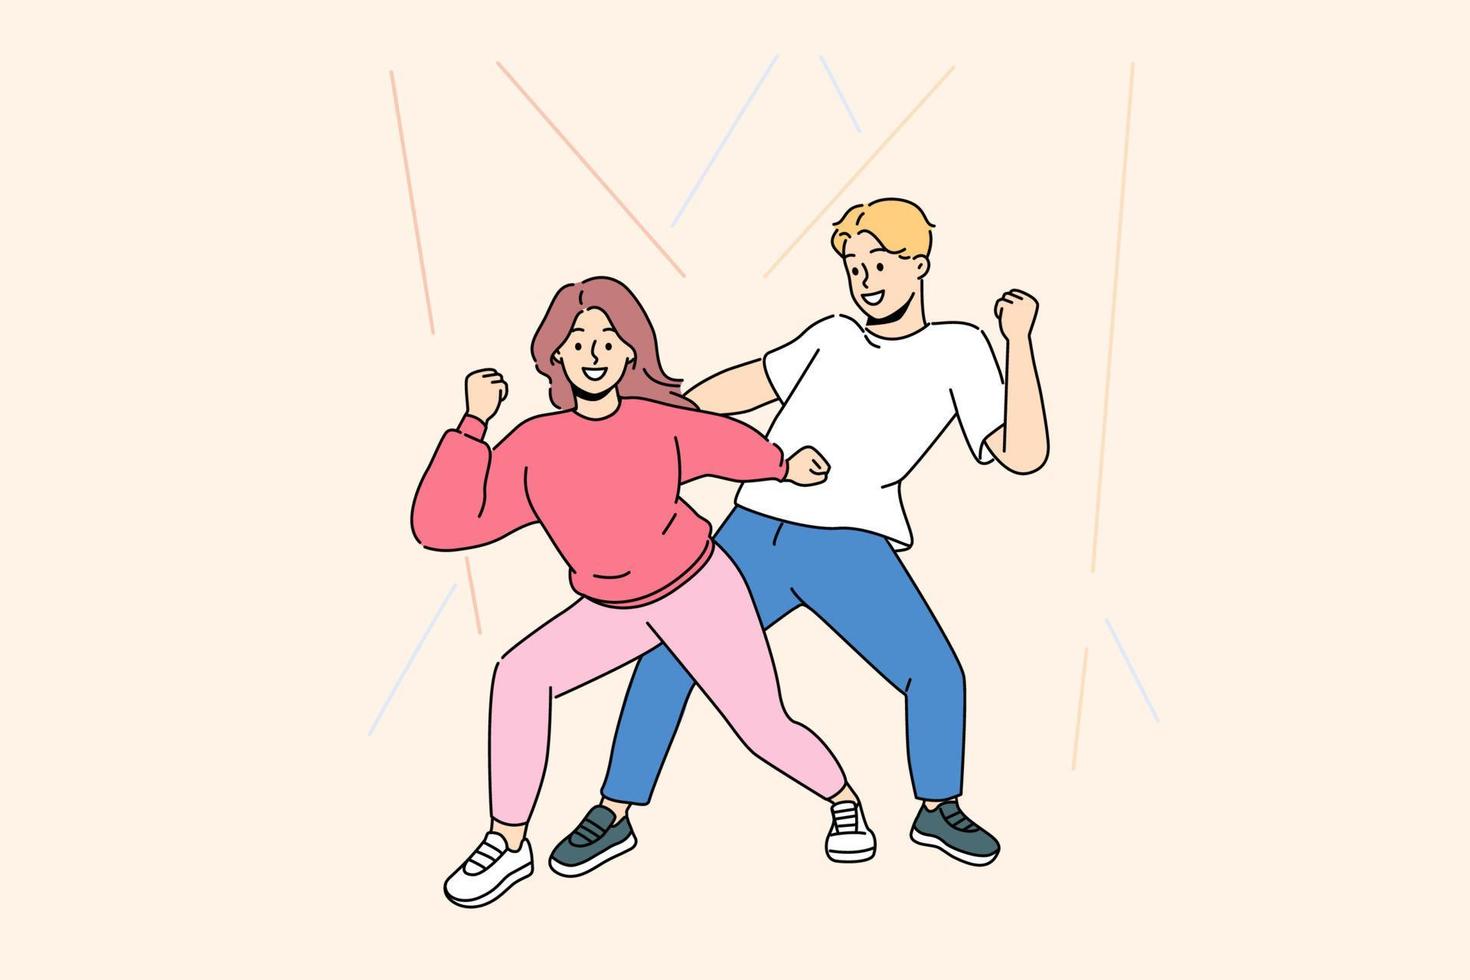 Happy man and woman have fun dancing hip hop together. Smiling couple in bright clothes engaged in dancing activity. Hobby and leisure. Vector illustration.